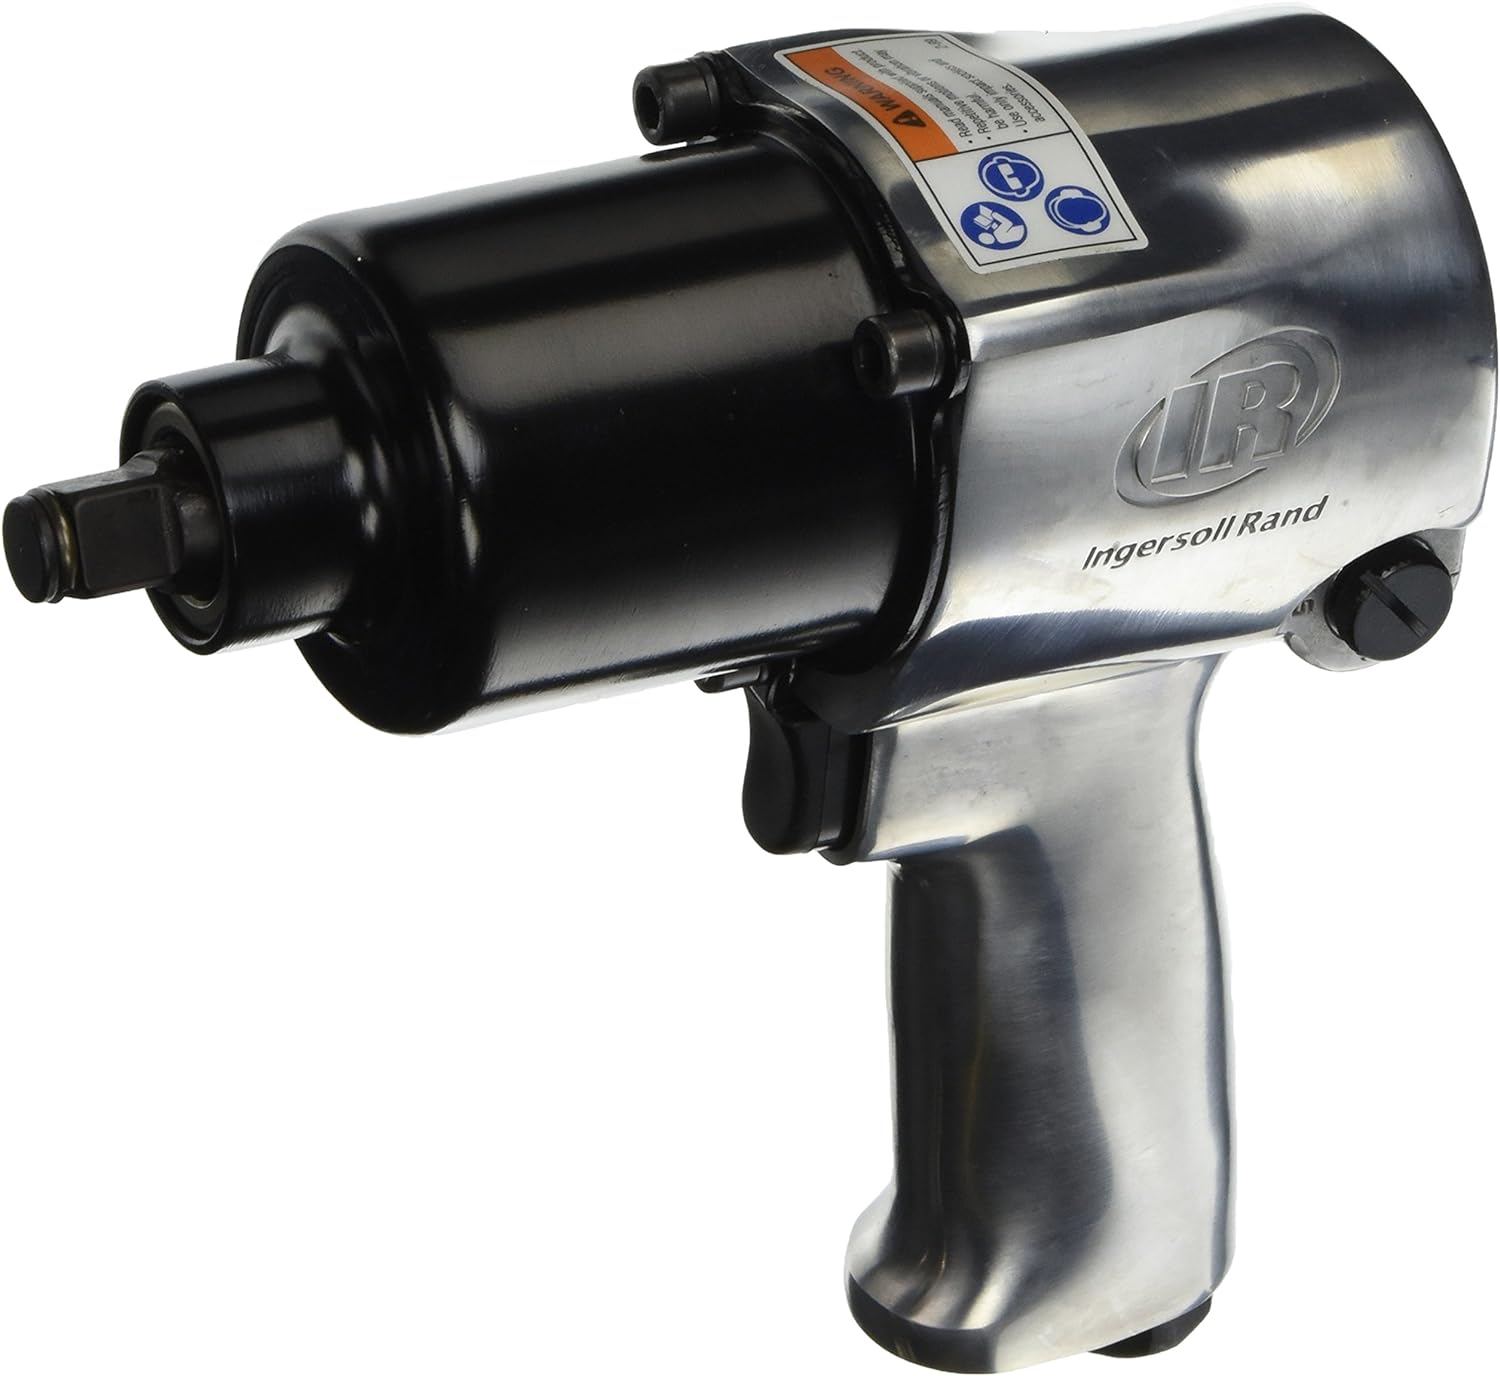 Ingersoll Rand 231HA 1/2 Drive Air Impact Wrench, Super Duty, 590 ft-lbs Max Torque Output  301B Air Die Grinder – 1/4, Right Angle, 21,000 RPM, Ball Bearing Construction